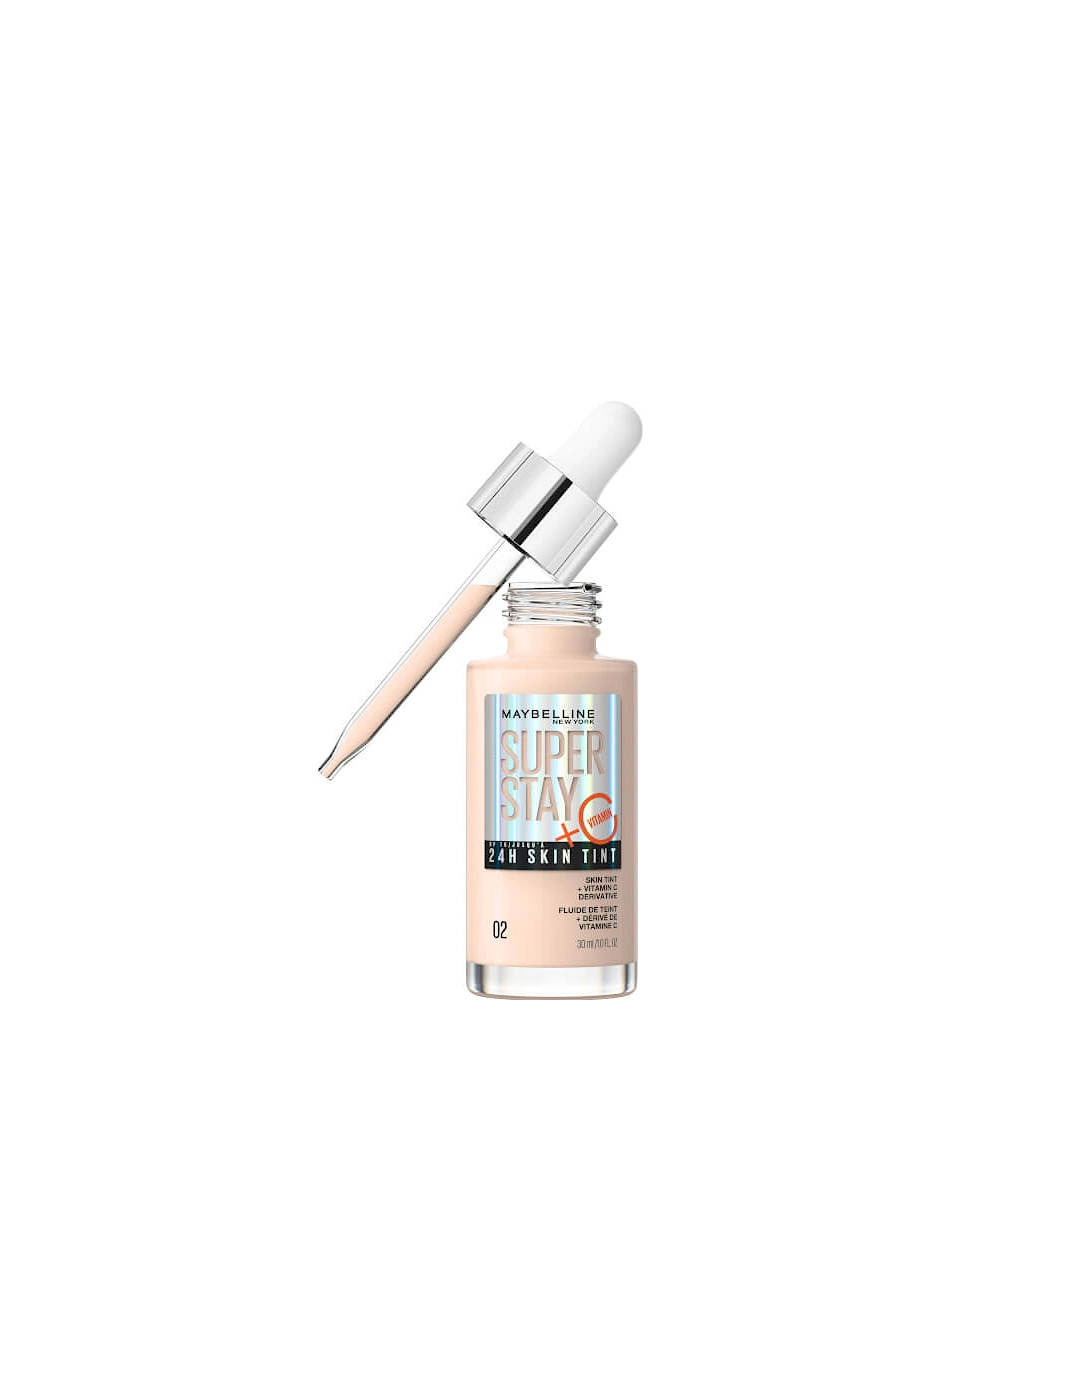 Super Stay up to 24H Skin Tint Foundation + Vitamin C - Shade 02, 2 of 1